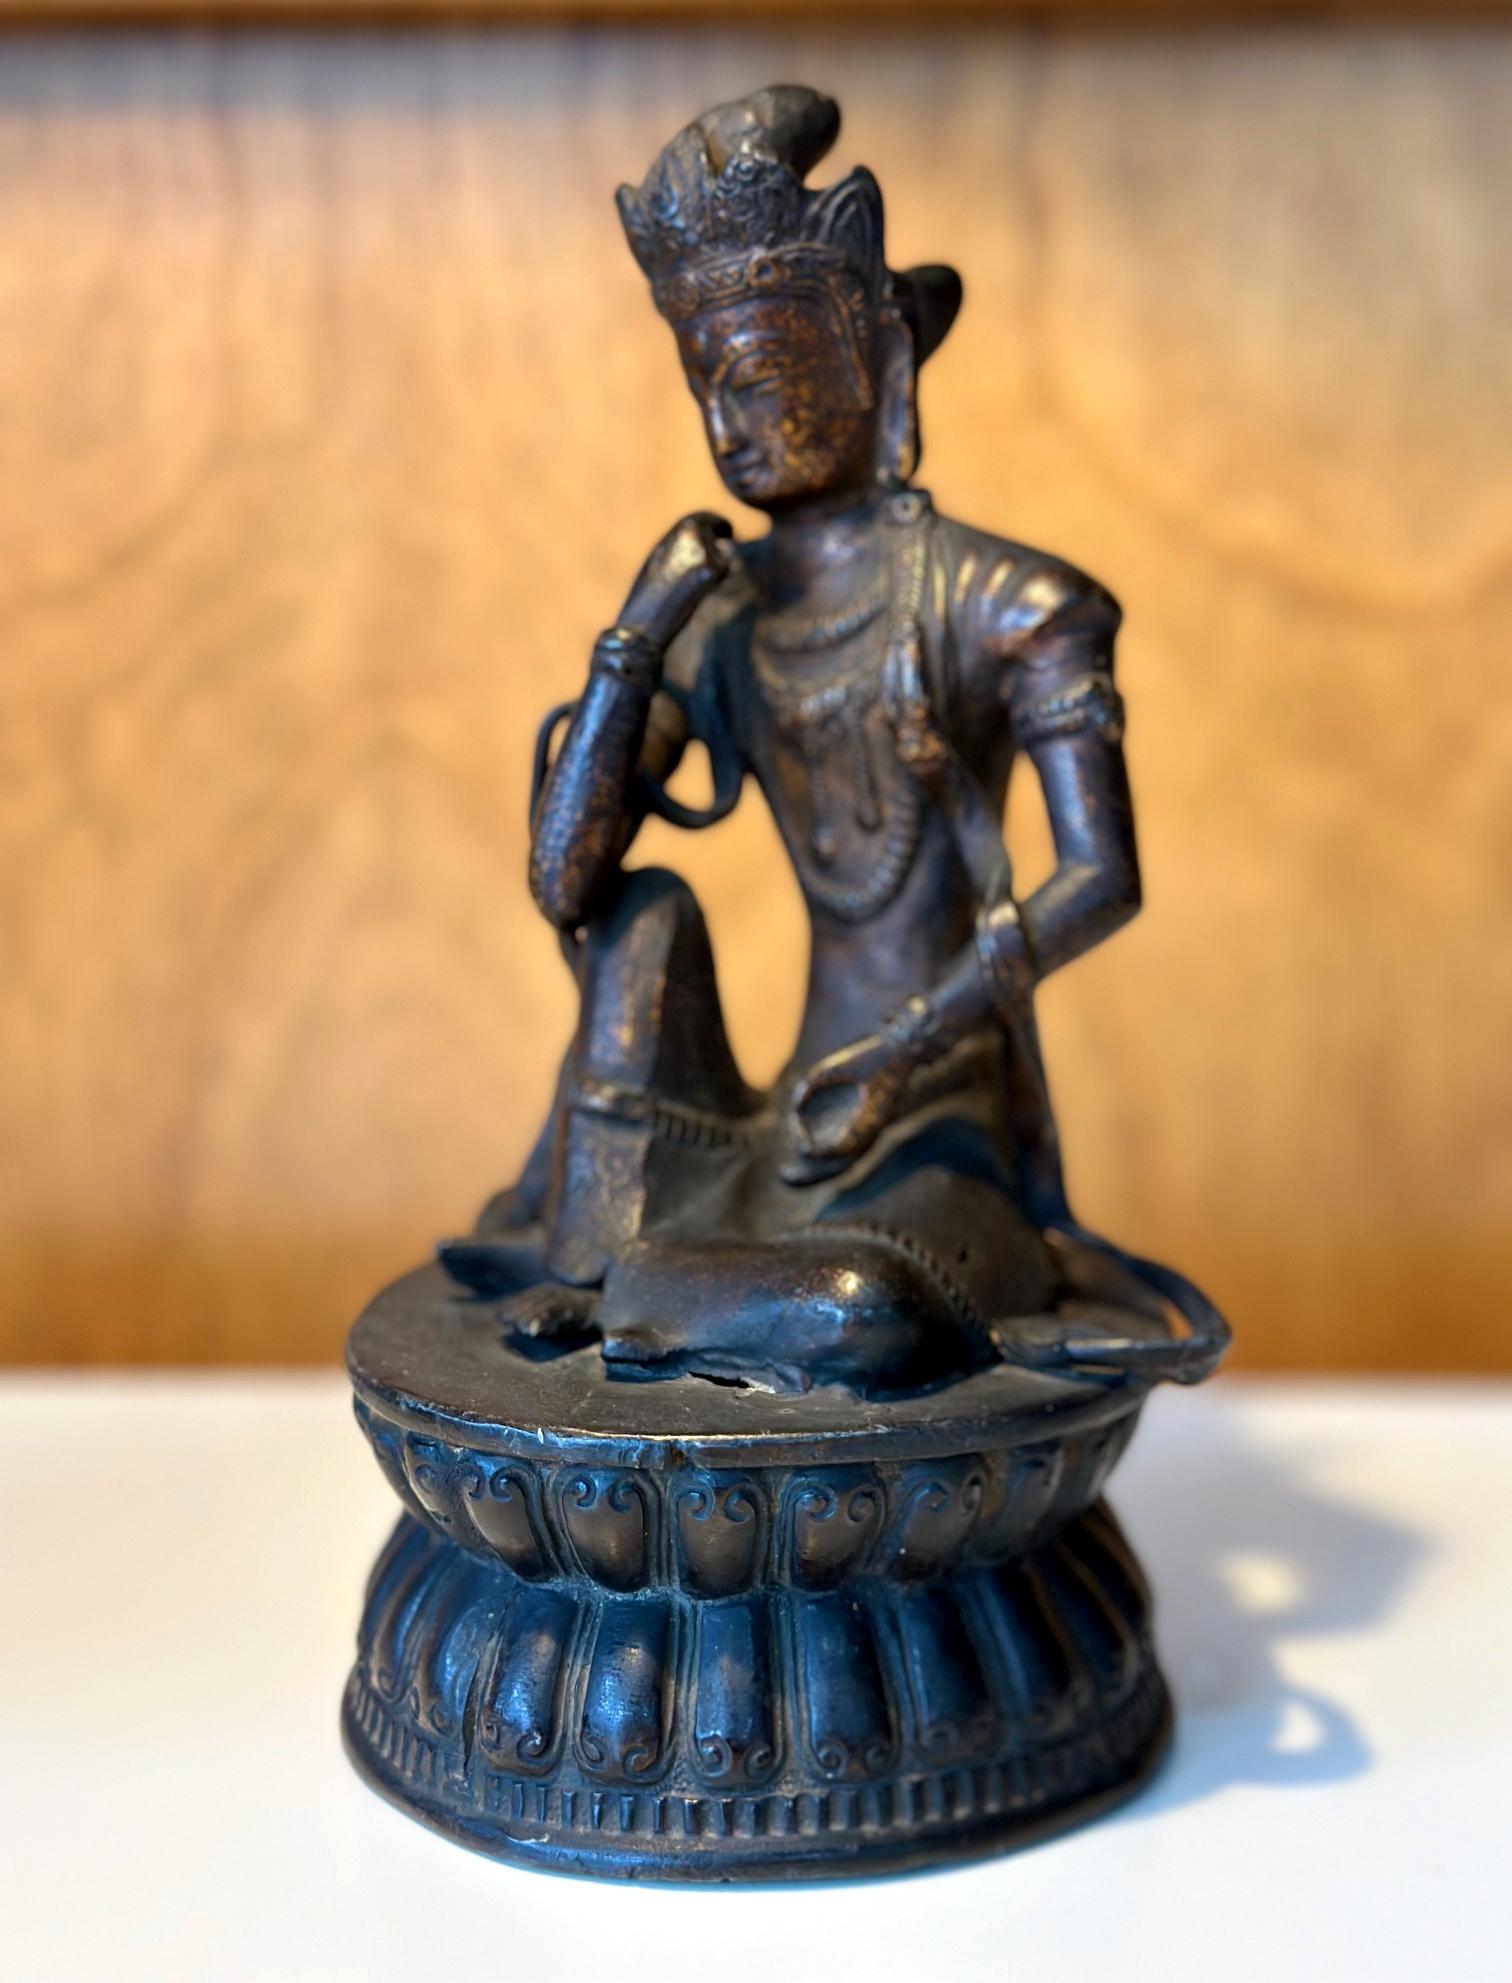 A small and fine Japanese bronze statue of Nyoirin Kannon circa 18th century of Edo period. Kannon is bodhisattva of Mercy and Compassion (Avalokitesvara in Sanskrit and Guanyin in Chinese). The gilt bronze statue depicts one of the six variations